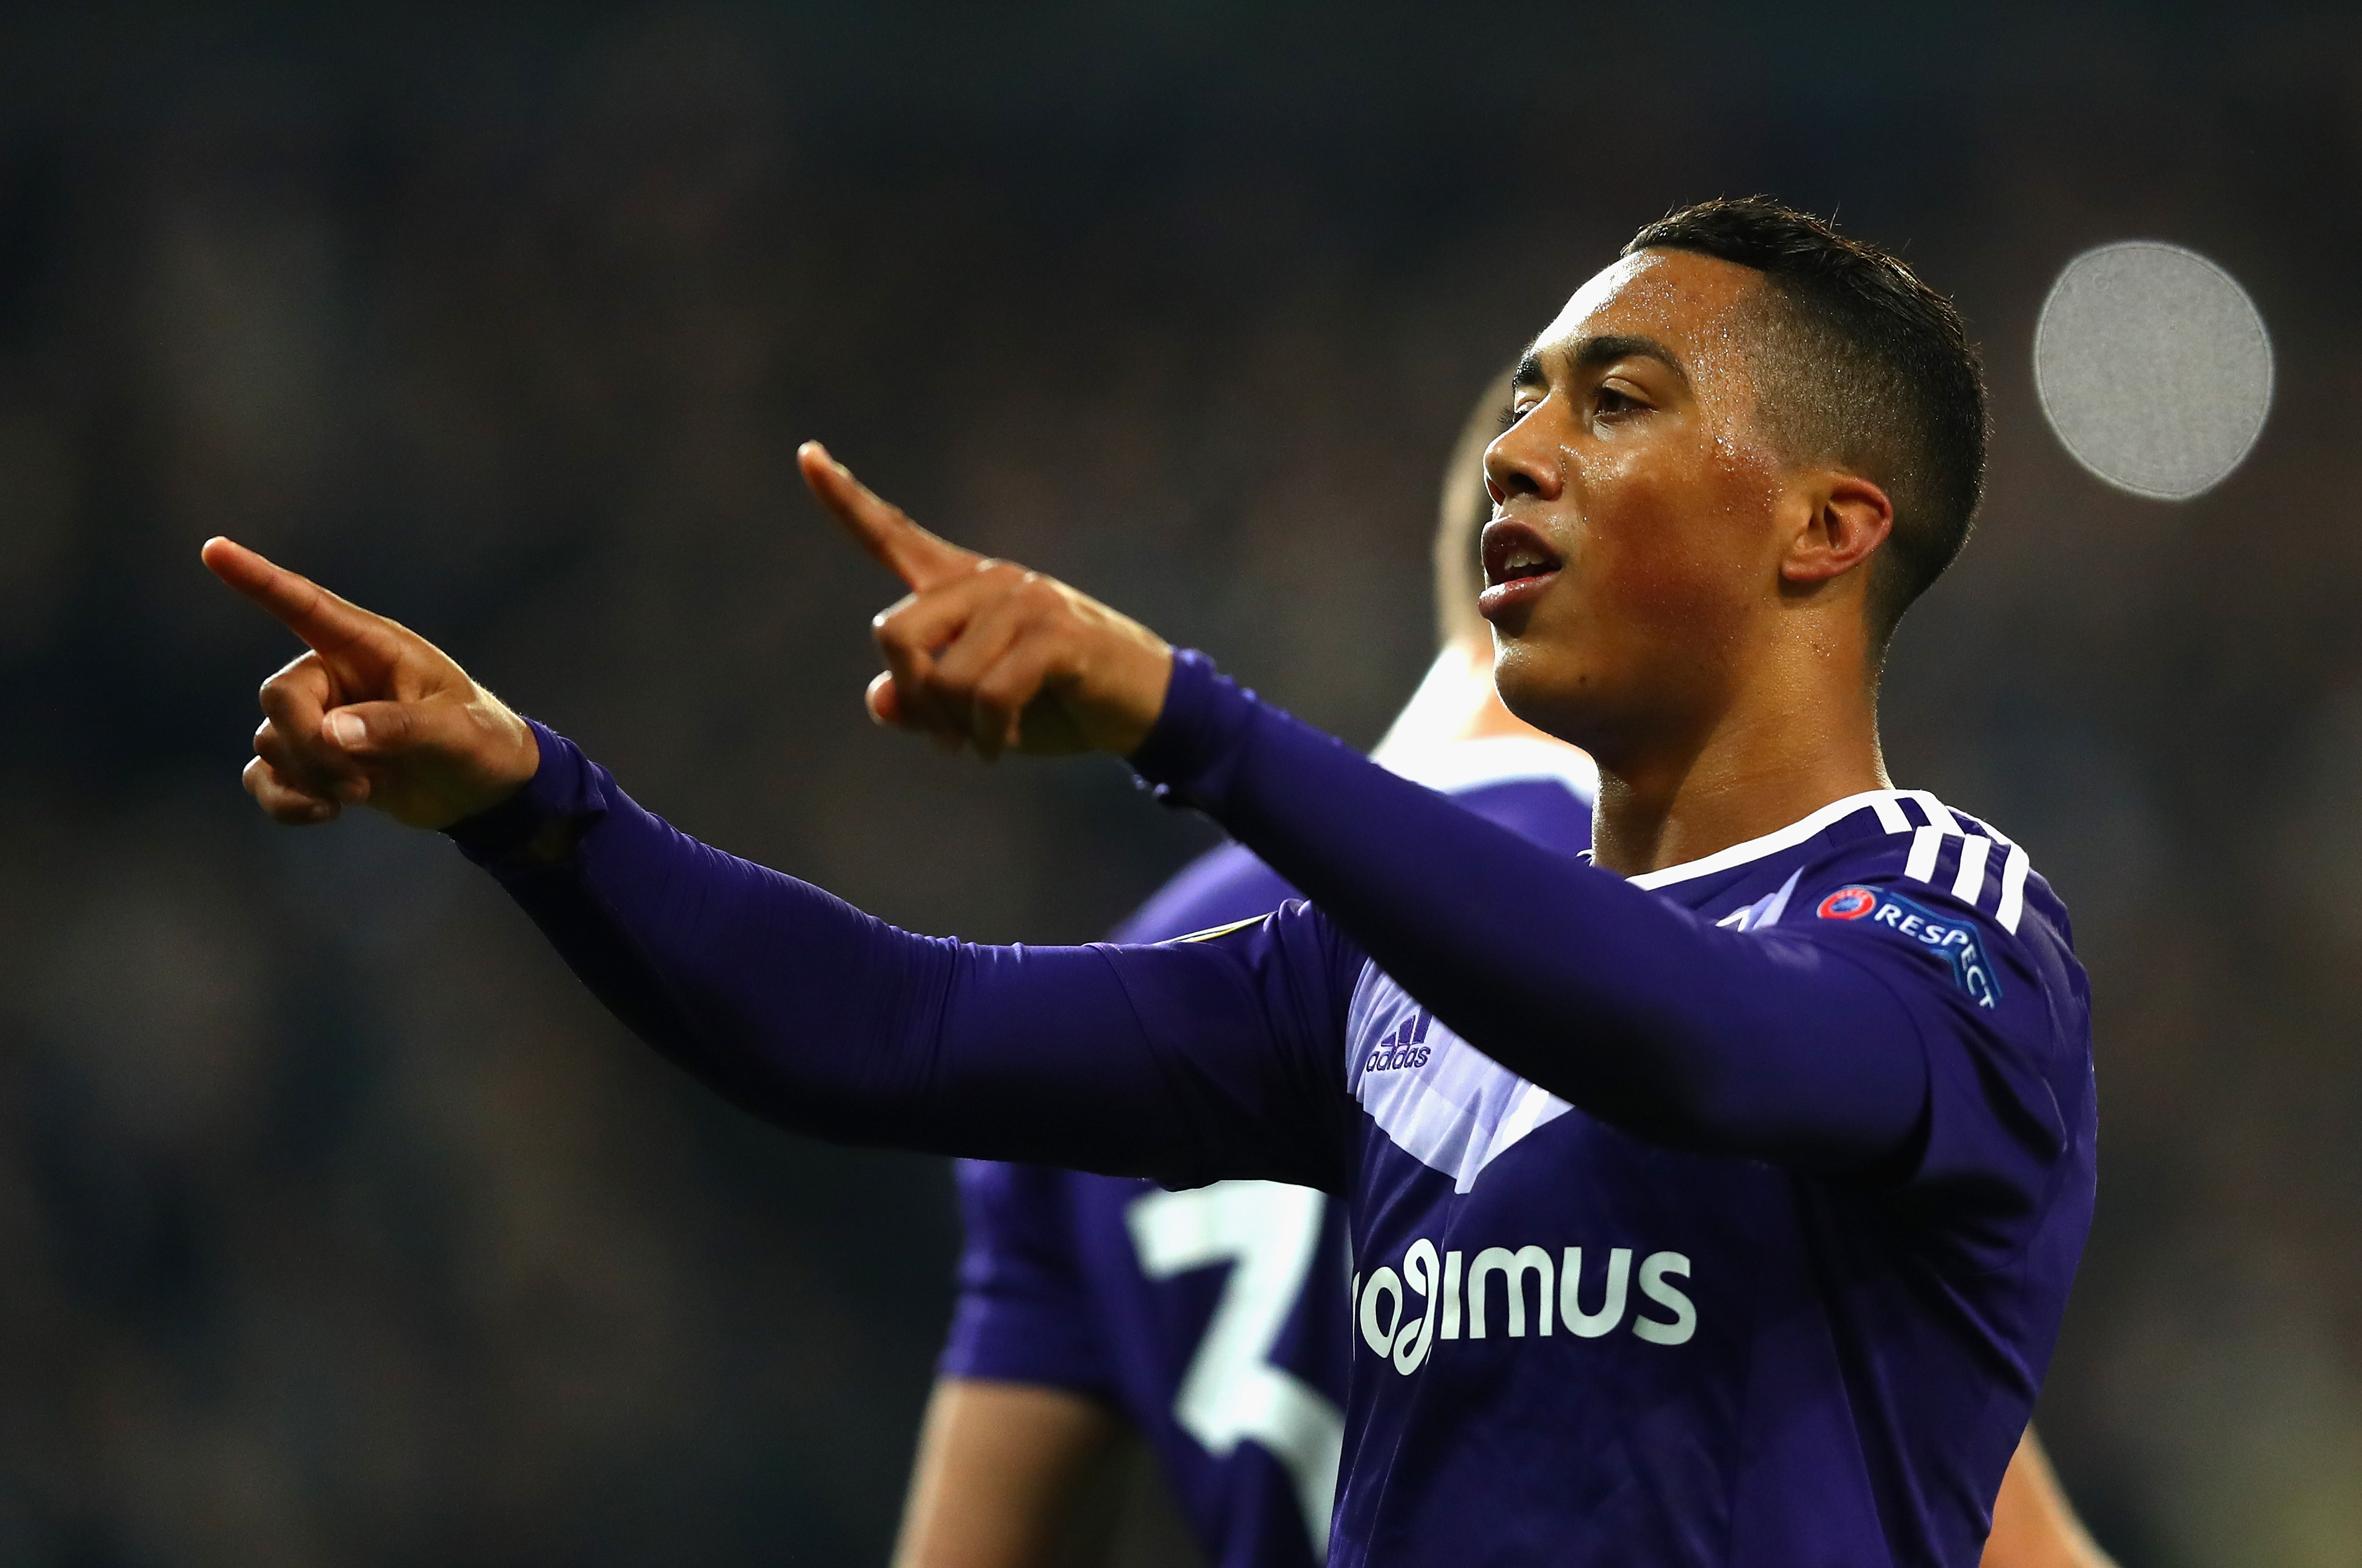 Di Marzio – Monaco very close to agreeing terms with Tielemans